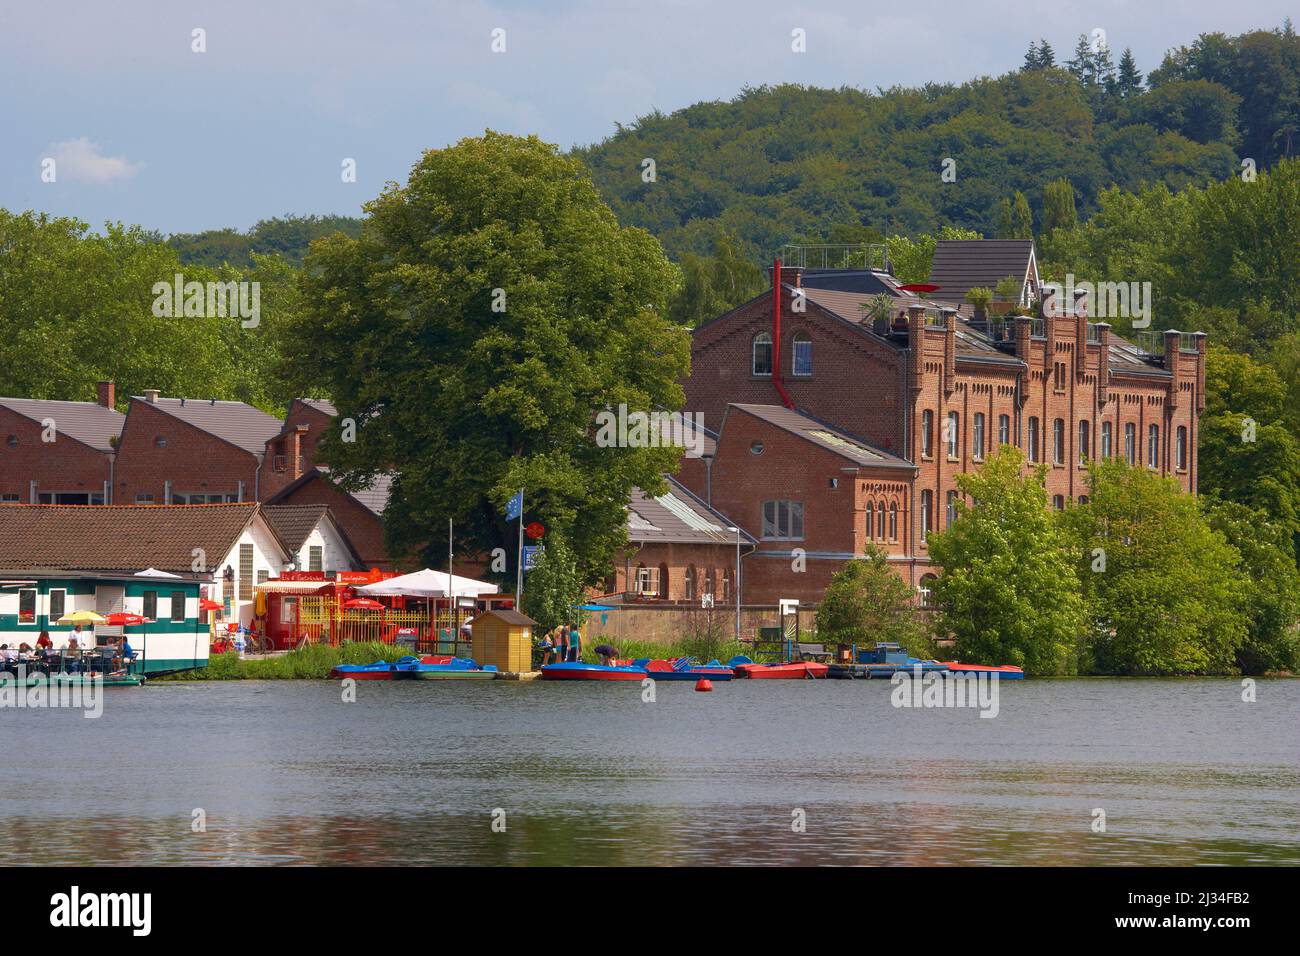 Ruhr (Kettwiger reservoir) with boats, pubs and former Scheidtscher cloth factory, Essen-Kettwig, Ruhr area, North Rhine-Westphalia, Germany, Europe Stock Photo